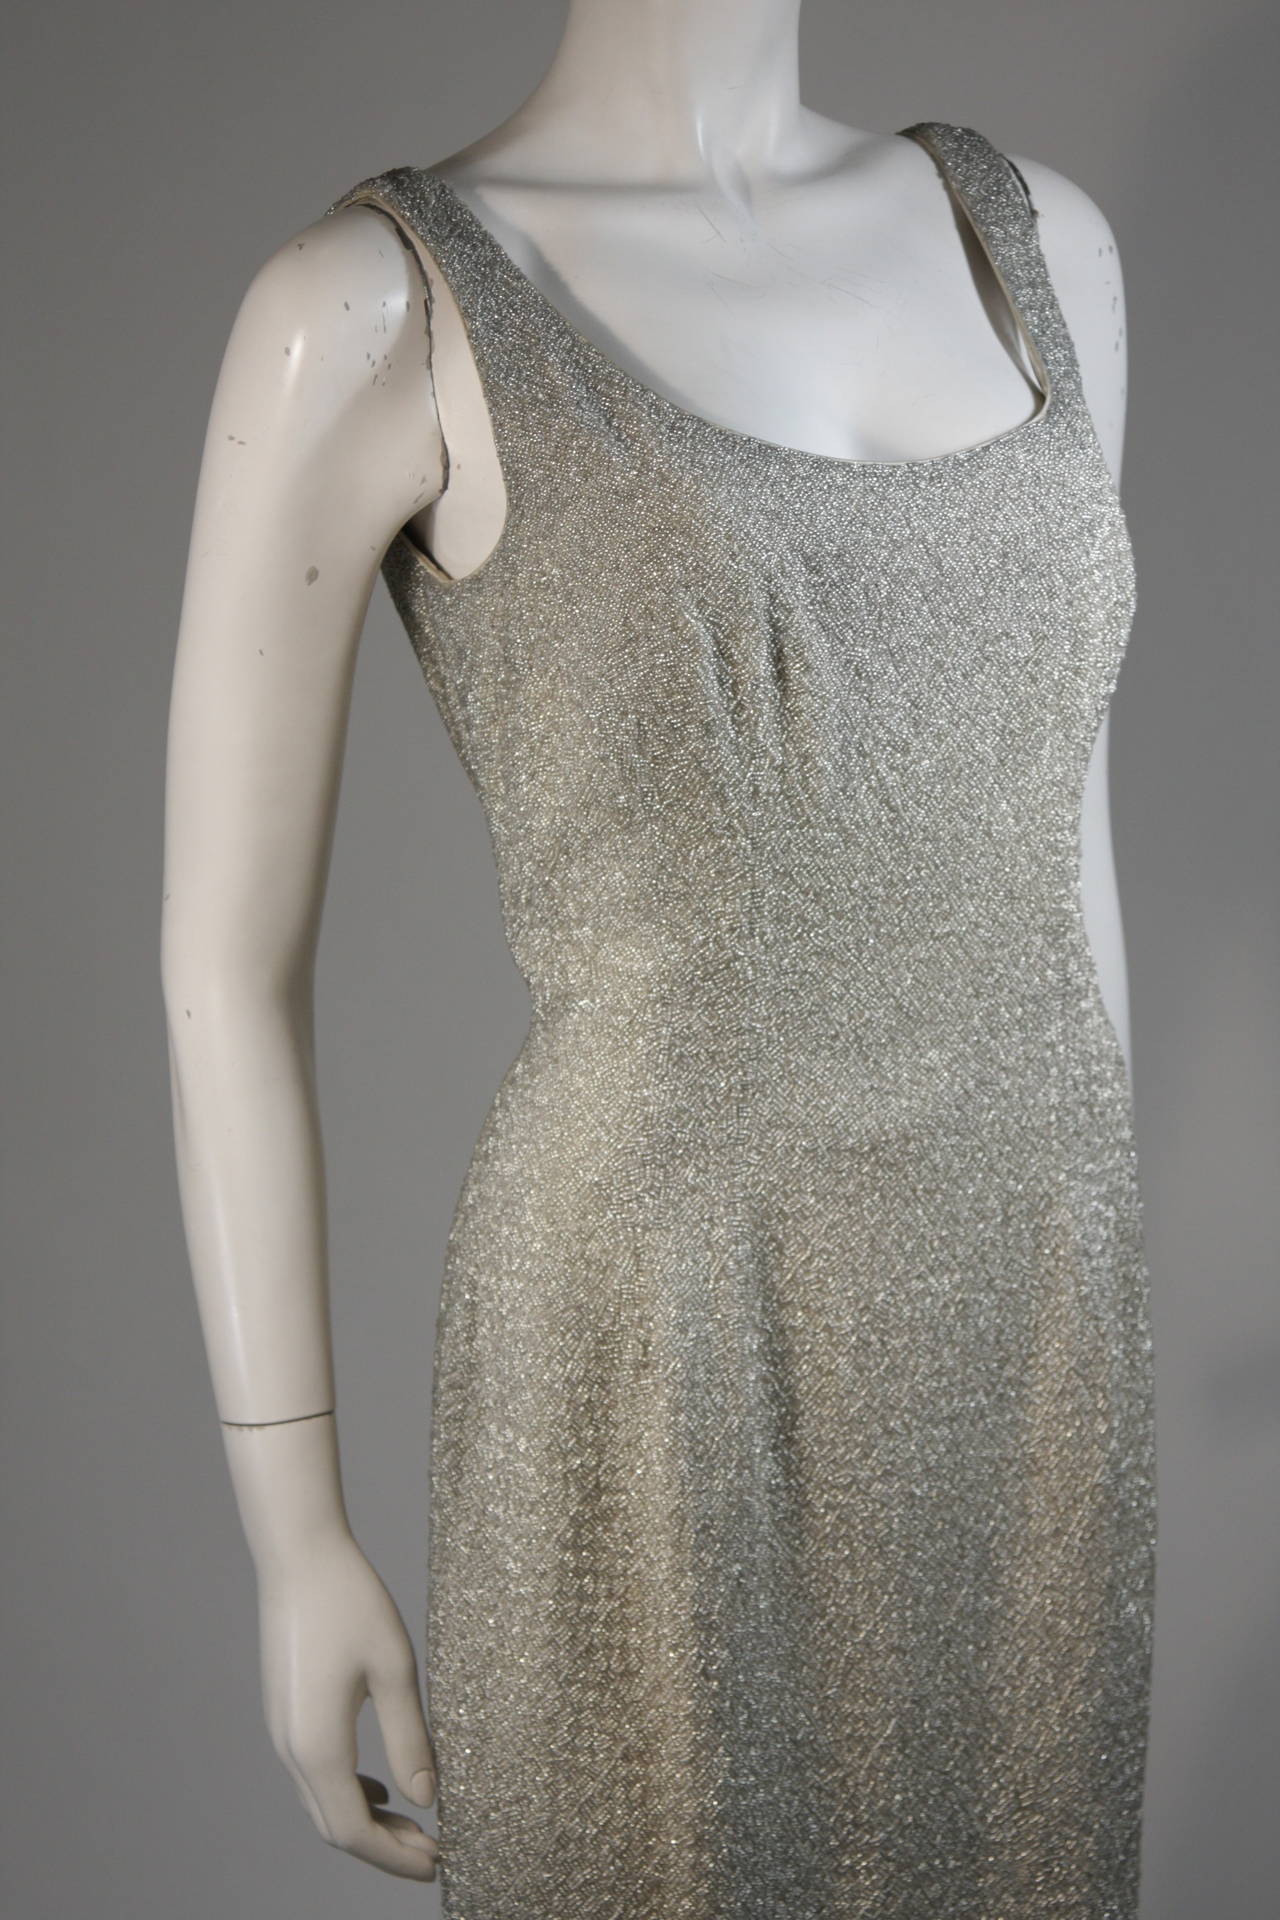 Women's 1960s Haute Couture International Heavily Beaded Gown Size Medium For Sale